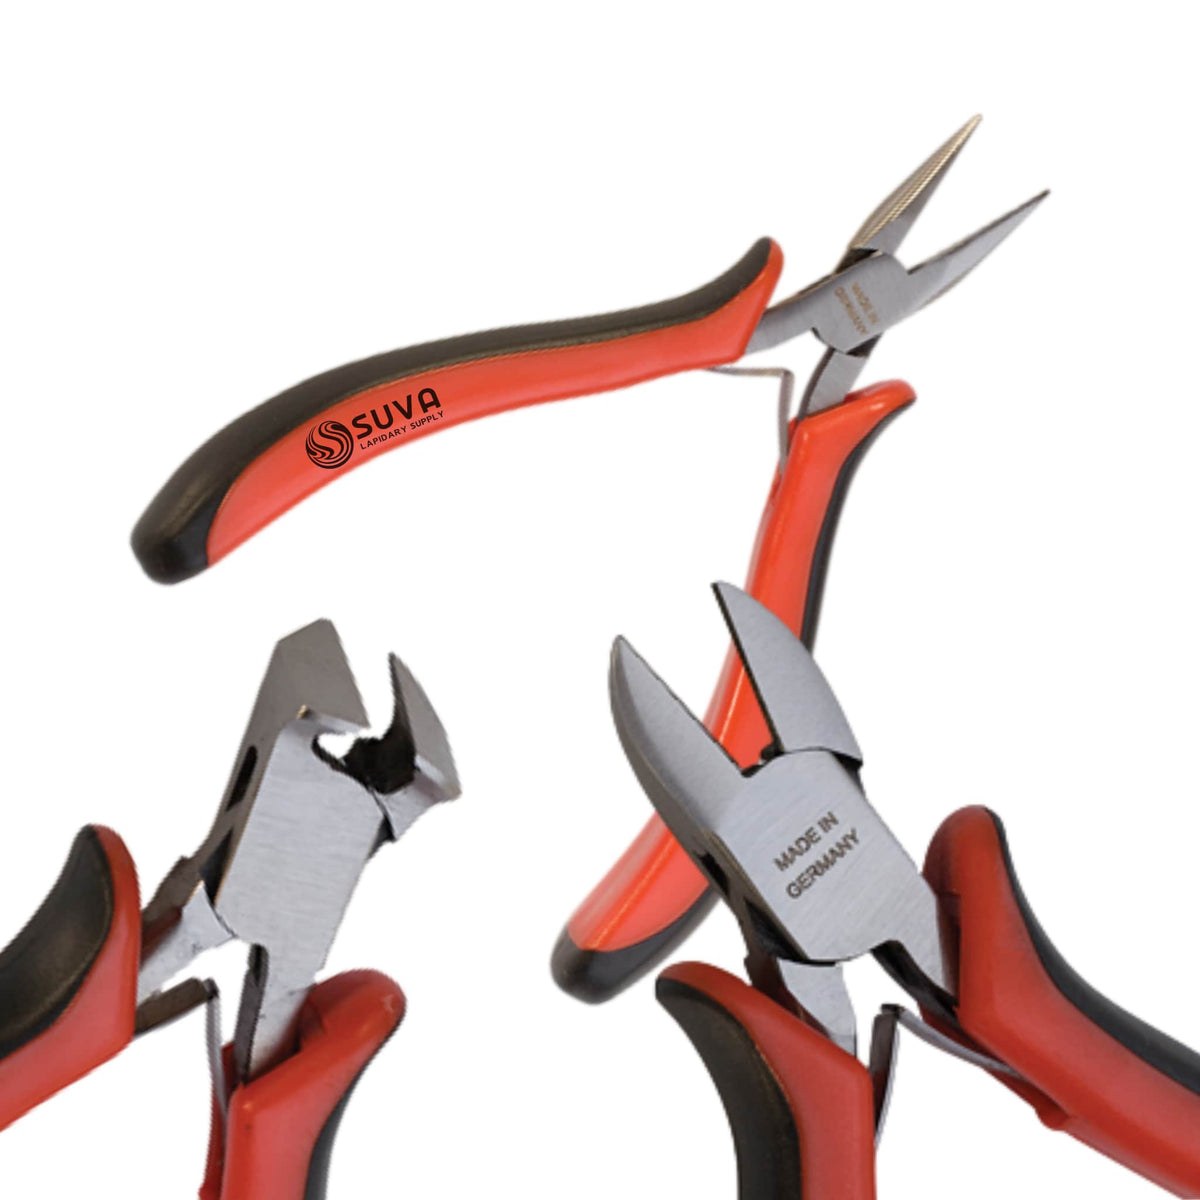 Eurotool EuroNOMIC Two-K German Jewelers Pliers & Cutters for sale at SUVA  Lapidary Supply